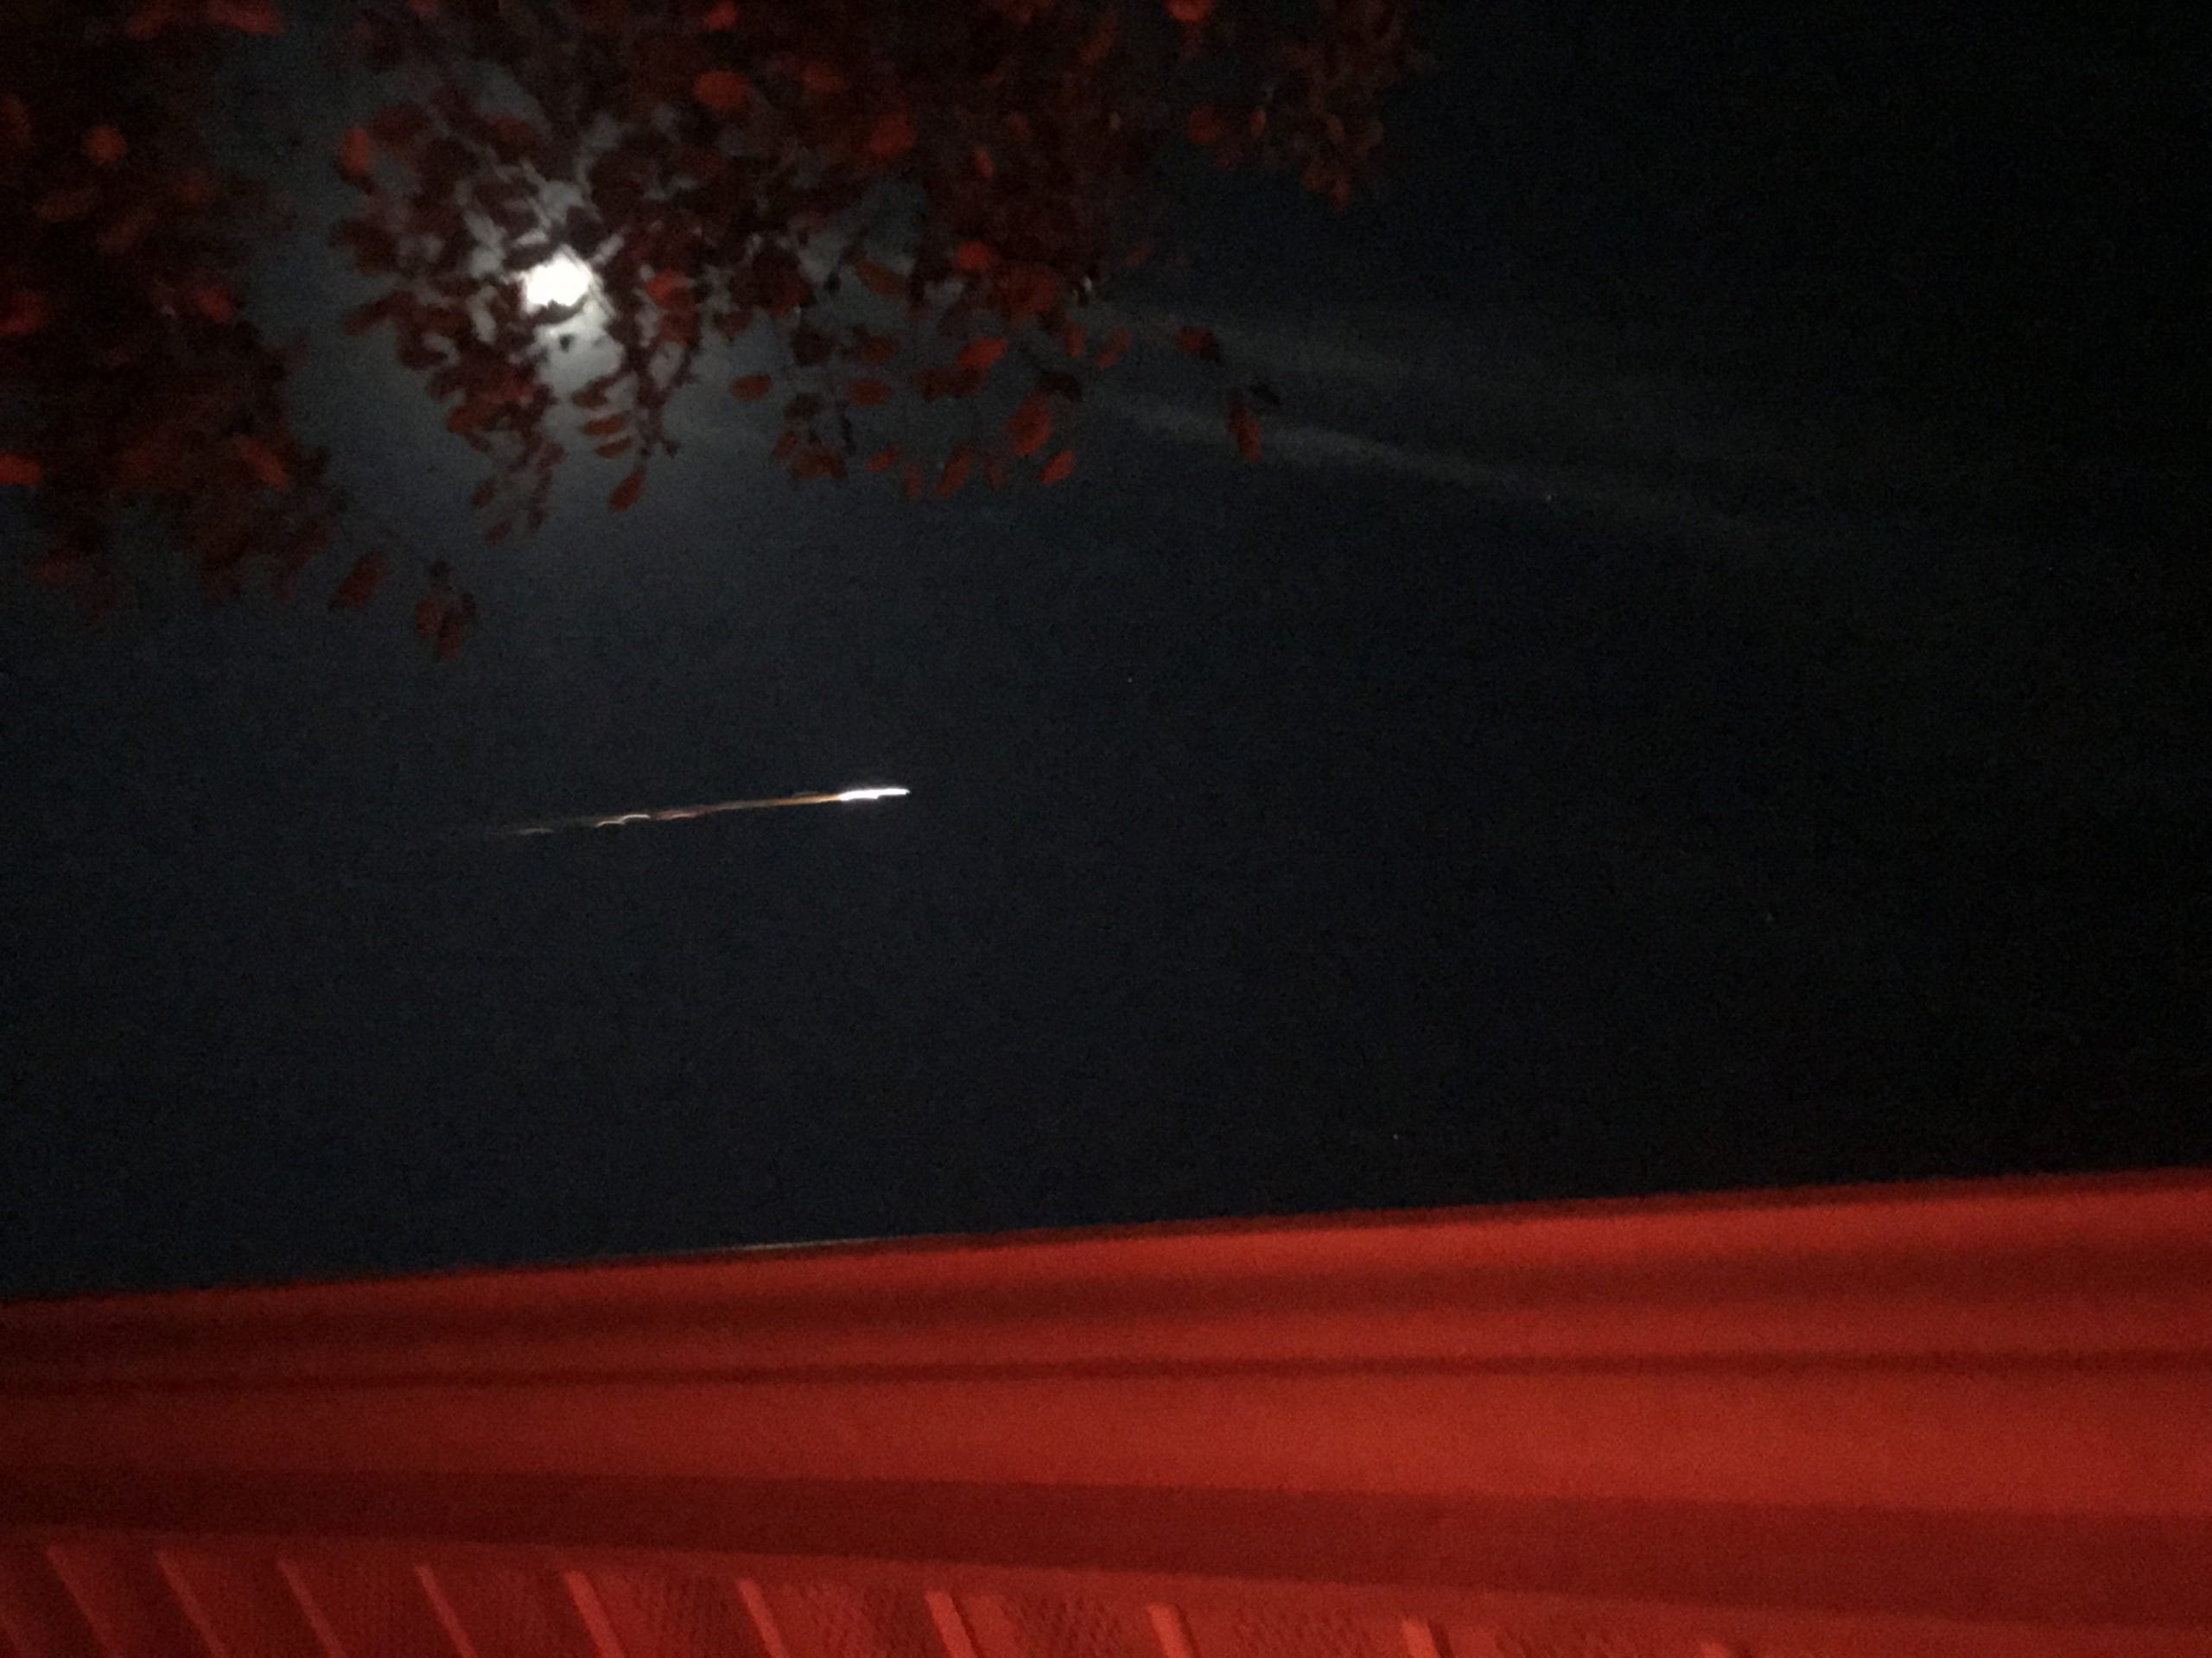 Photo of the alleged Russian spy satellite taken by Matt E of Traverse City, a member of the American Meteor Society who described it as a "world changing event."